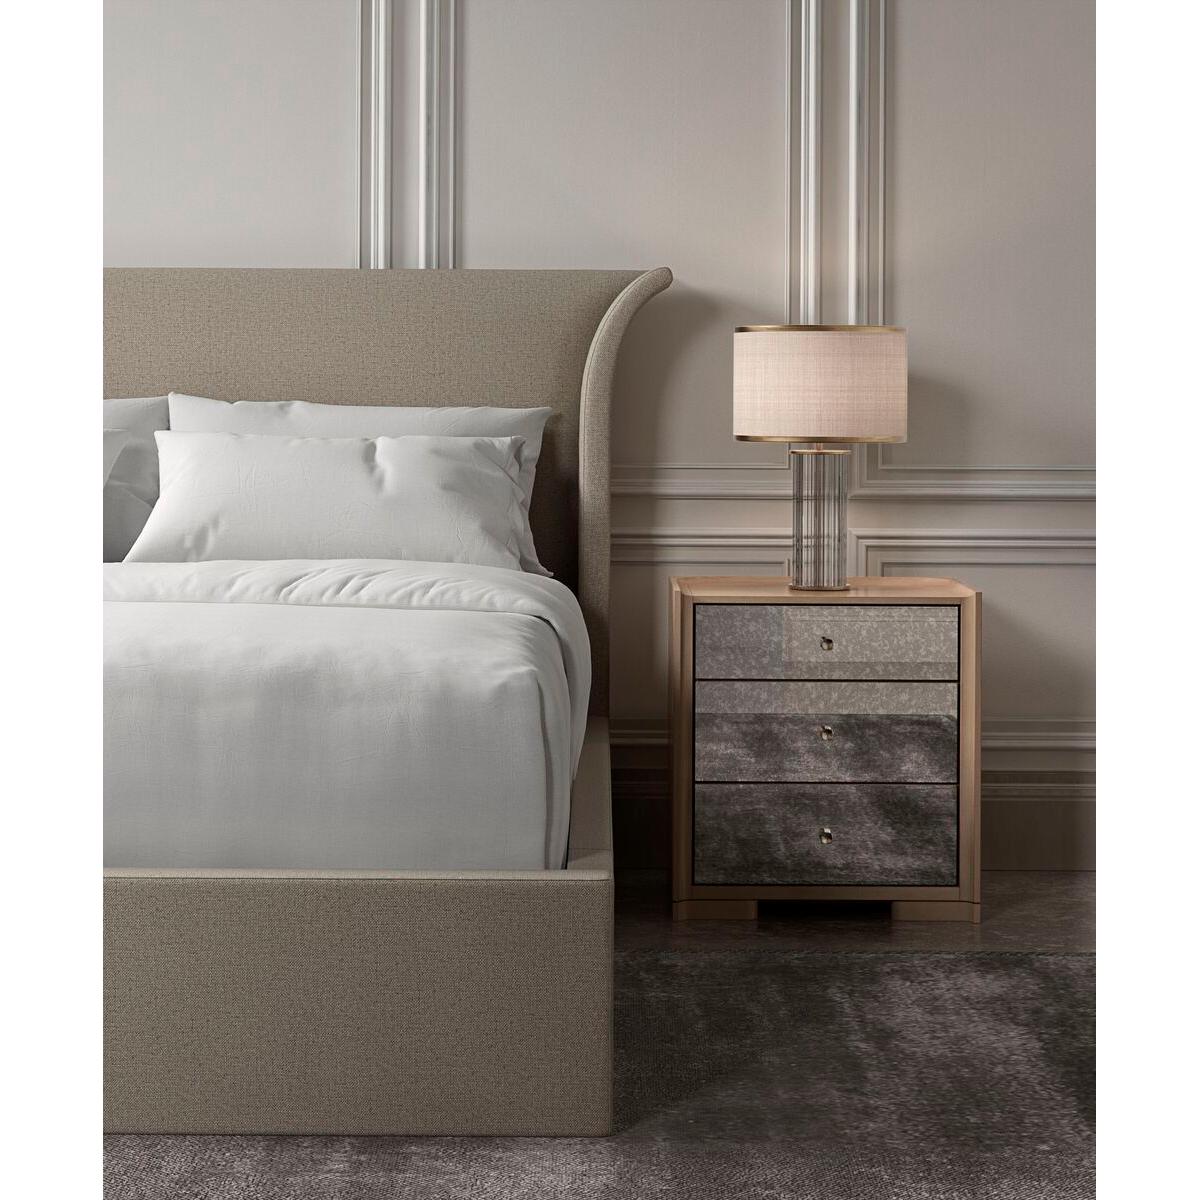 An elegant US queen-sized upholstered bed frame featuring a high headboard that is flared out and curves gently at the sides. The frame is wrapped in a medium oatmeal color fabric with a subtle textured finish, which suggests a contemporary design